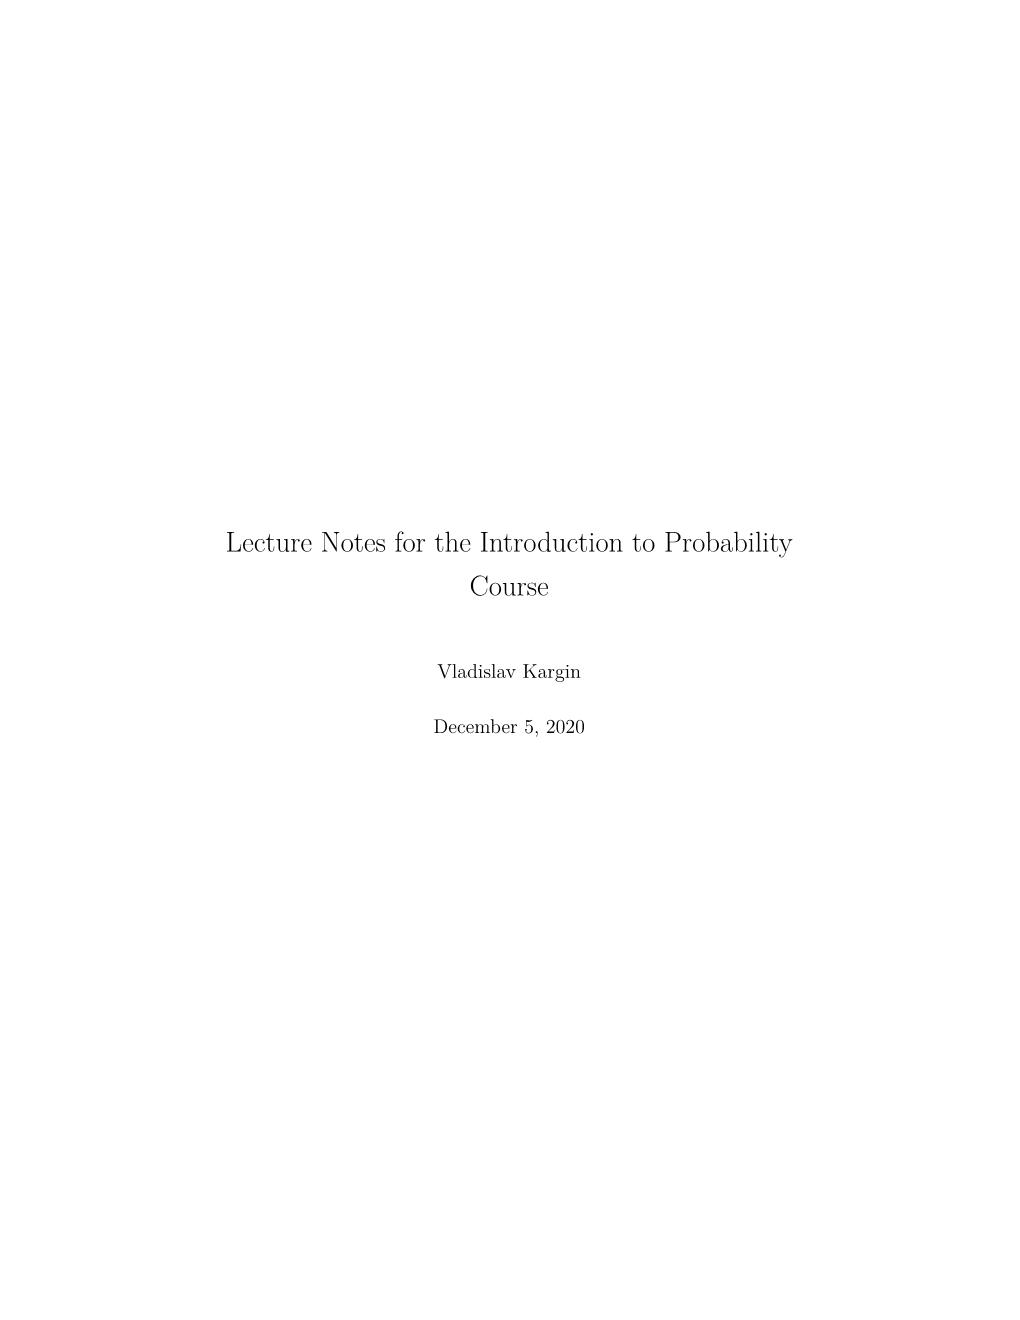 Lecture Notes for the Introduction to Probability Course